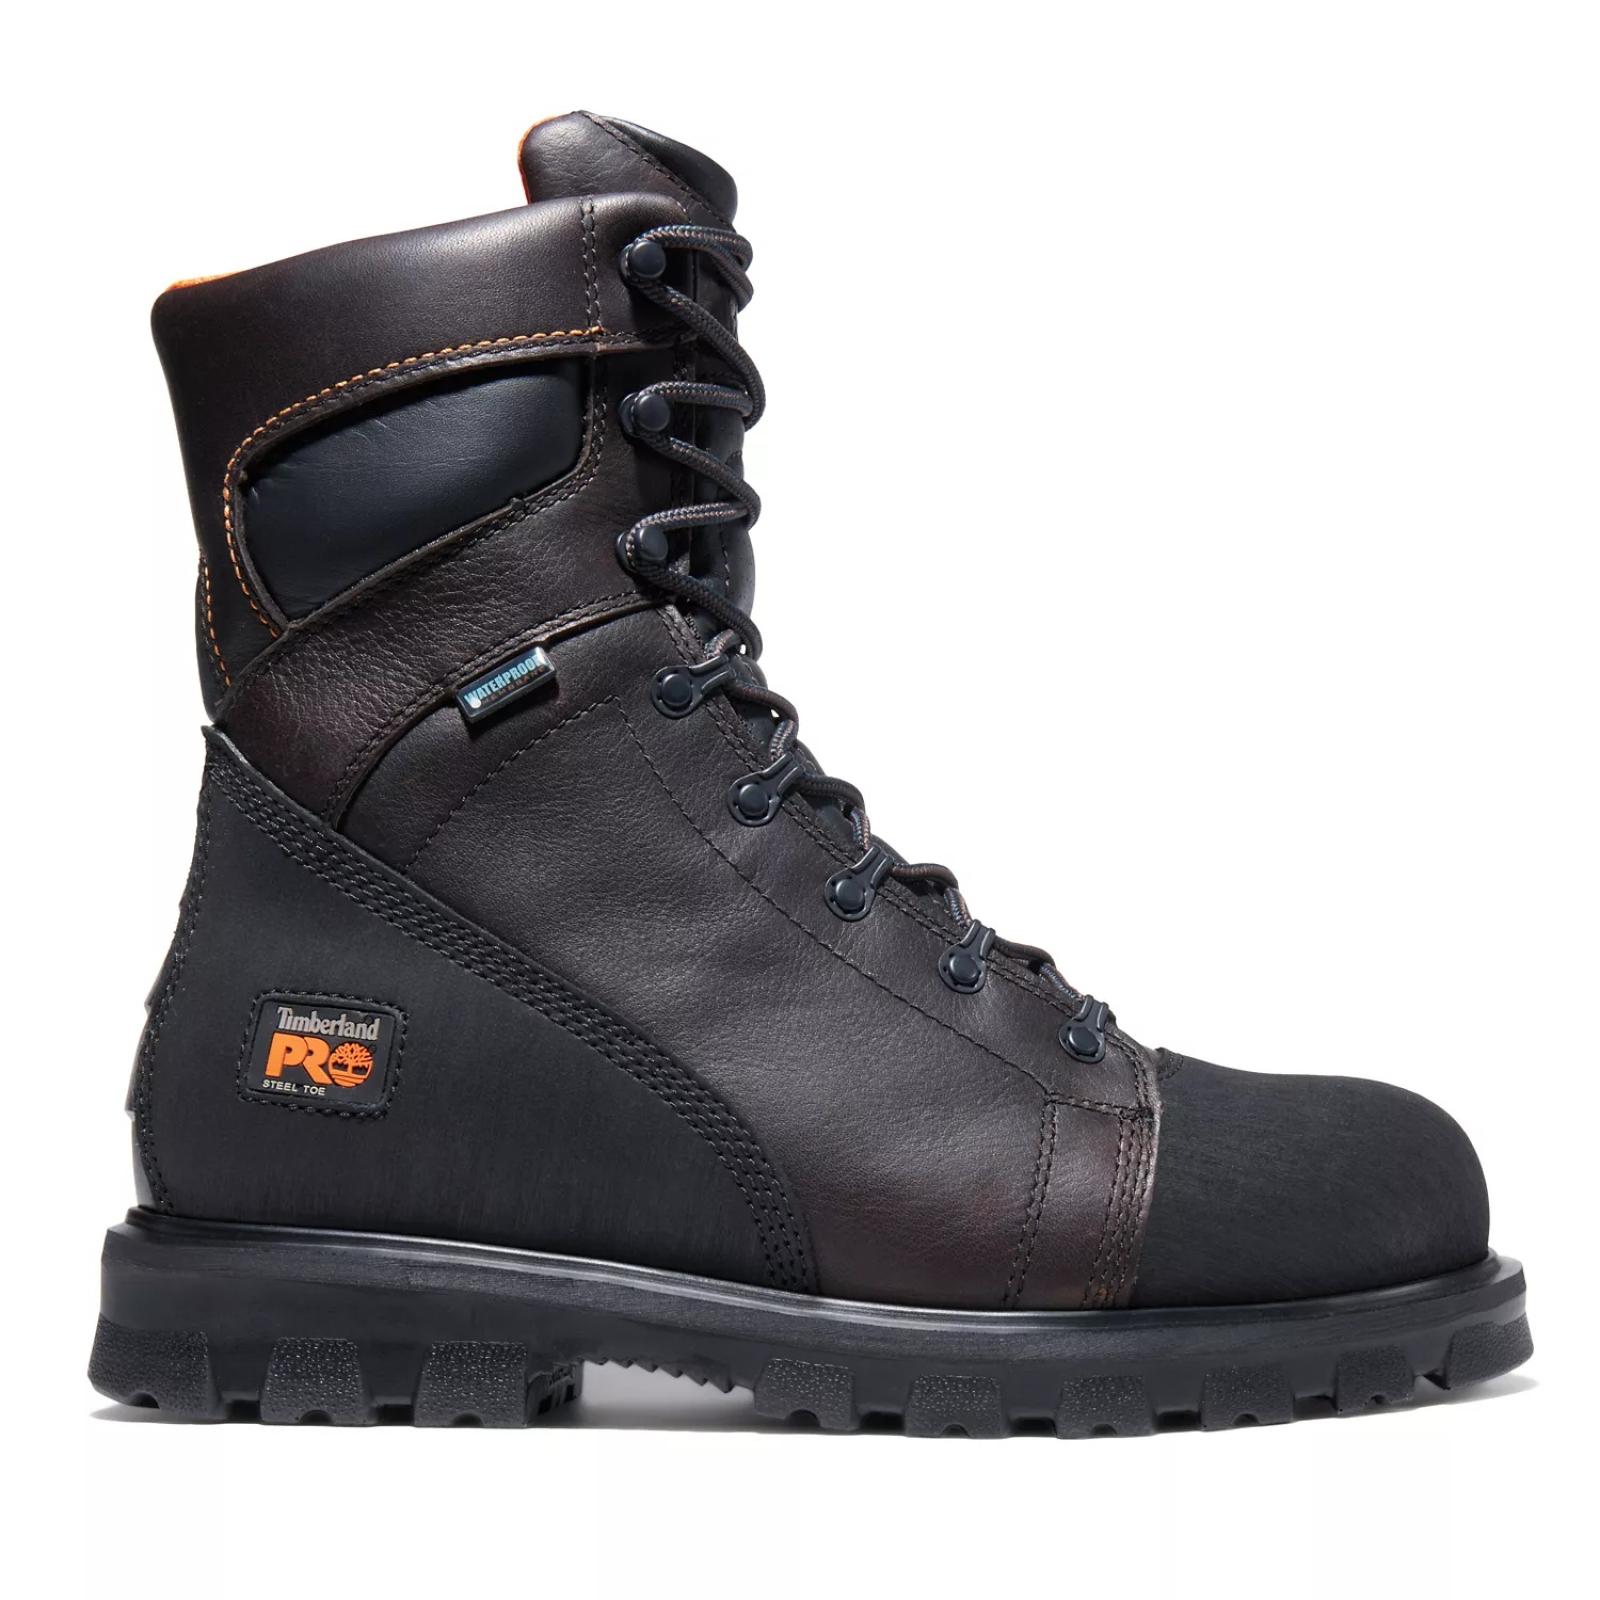 Timberland Pro Men's Rigmaster 8" Steel Toe Work Boots